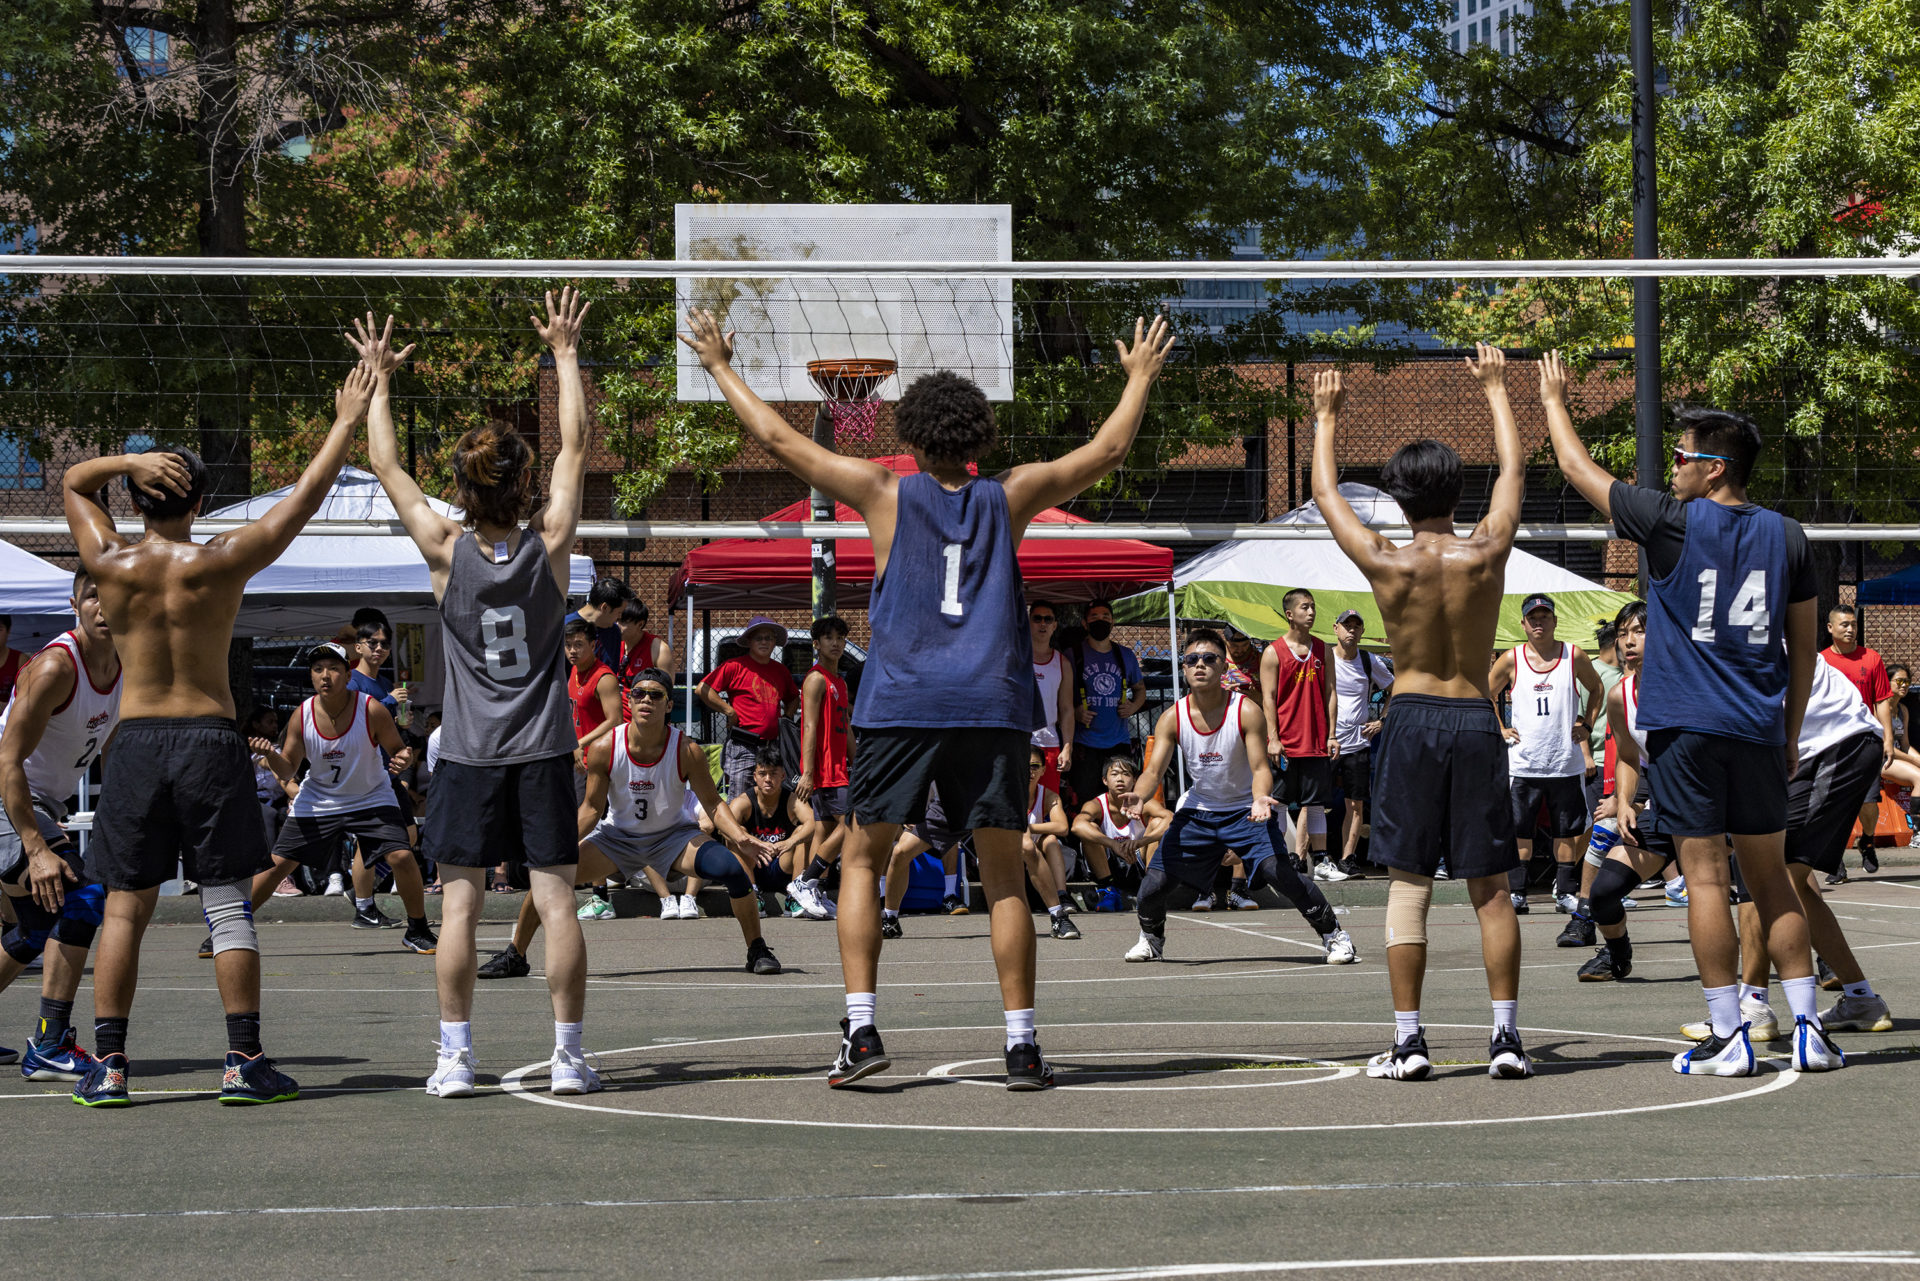 The Free Masons face off against the Rising Tide during the Reggie Wong Memorial Volleyball Tournament at Reggie Wong Park in Boston Chinatown.